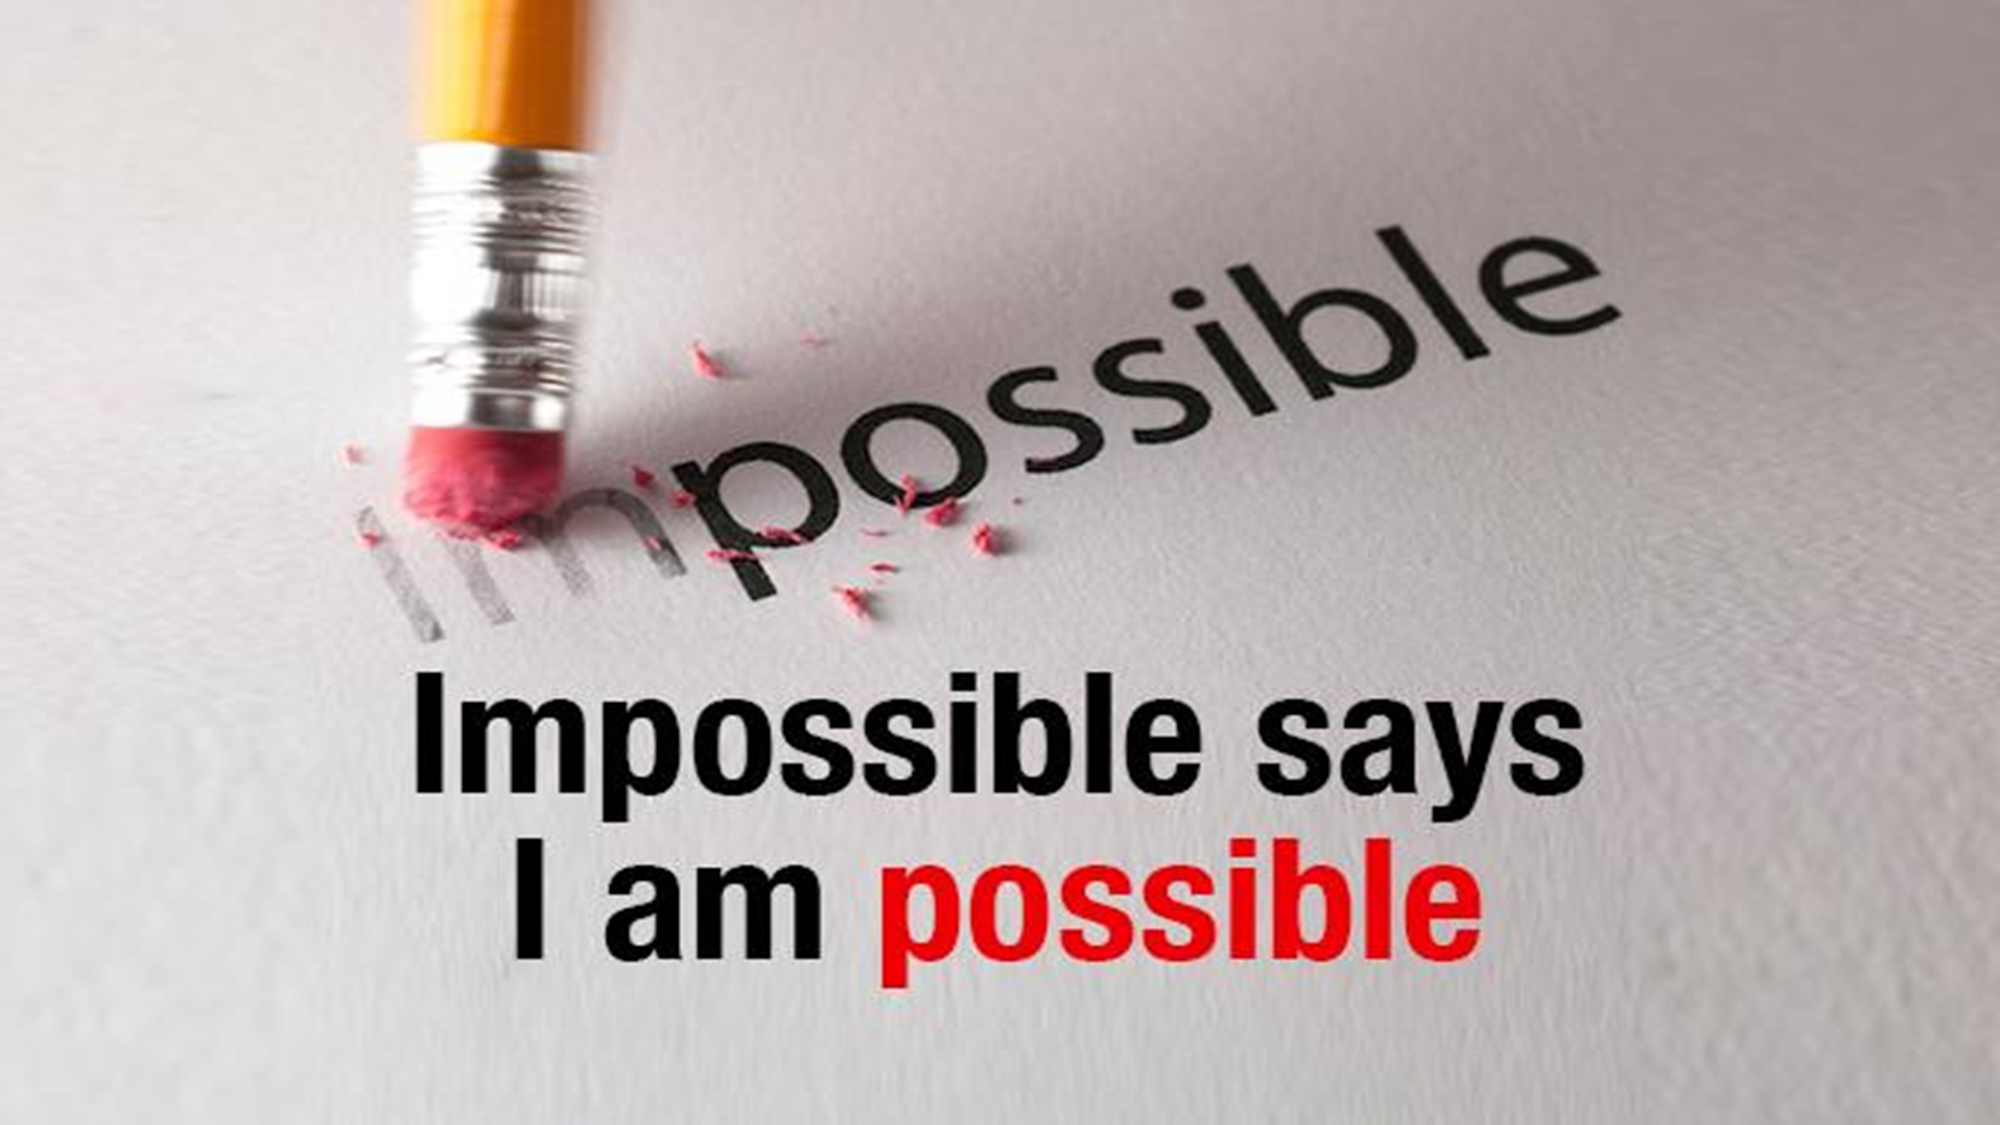 The file is possible. Possible Impossible. Картинка Impossible possible. Impossible is possible. Impossible надпись.